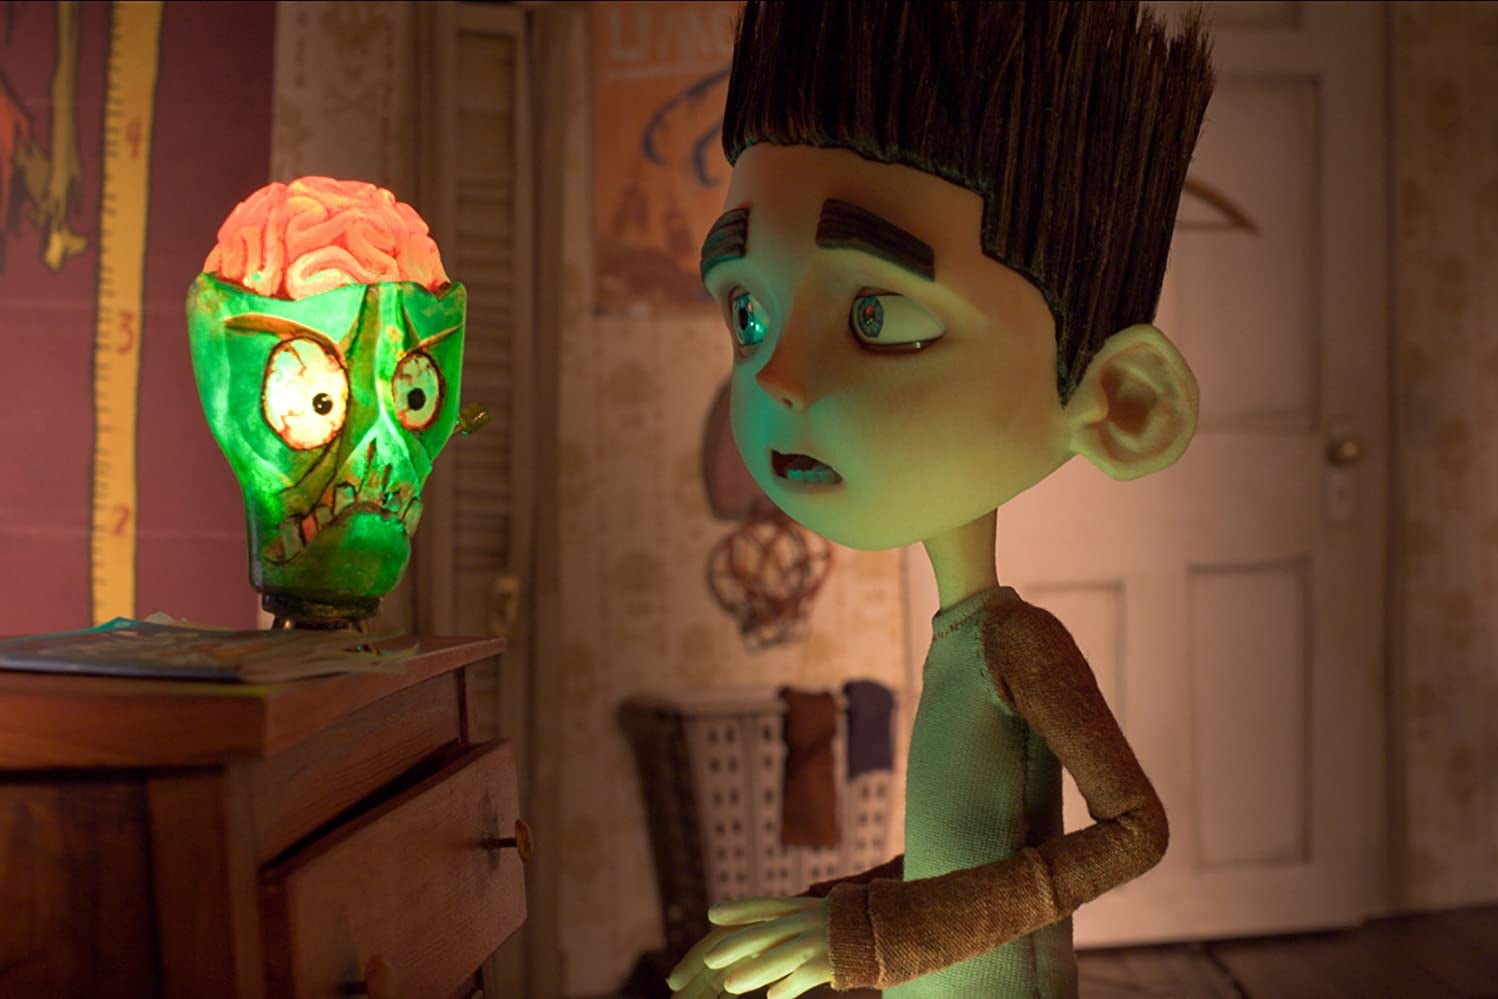 Norman Babcock looks at a glowing green skull lamp with an exposed brain.